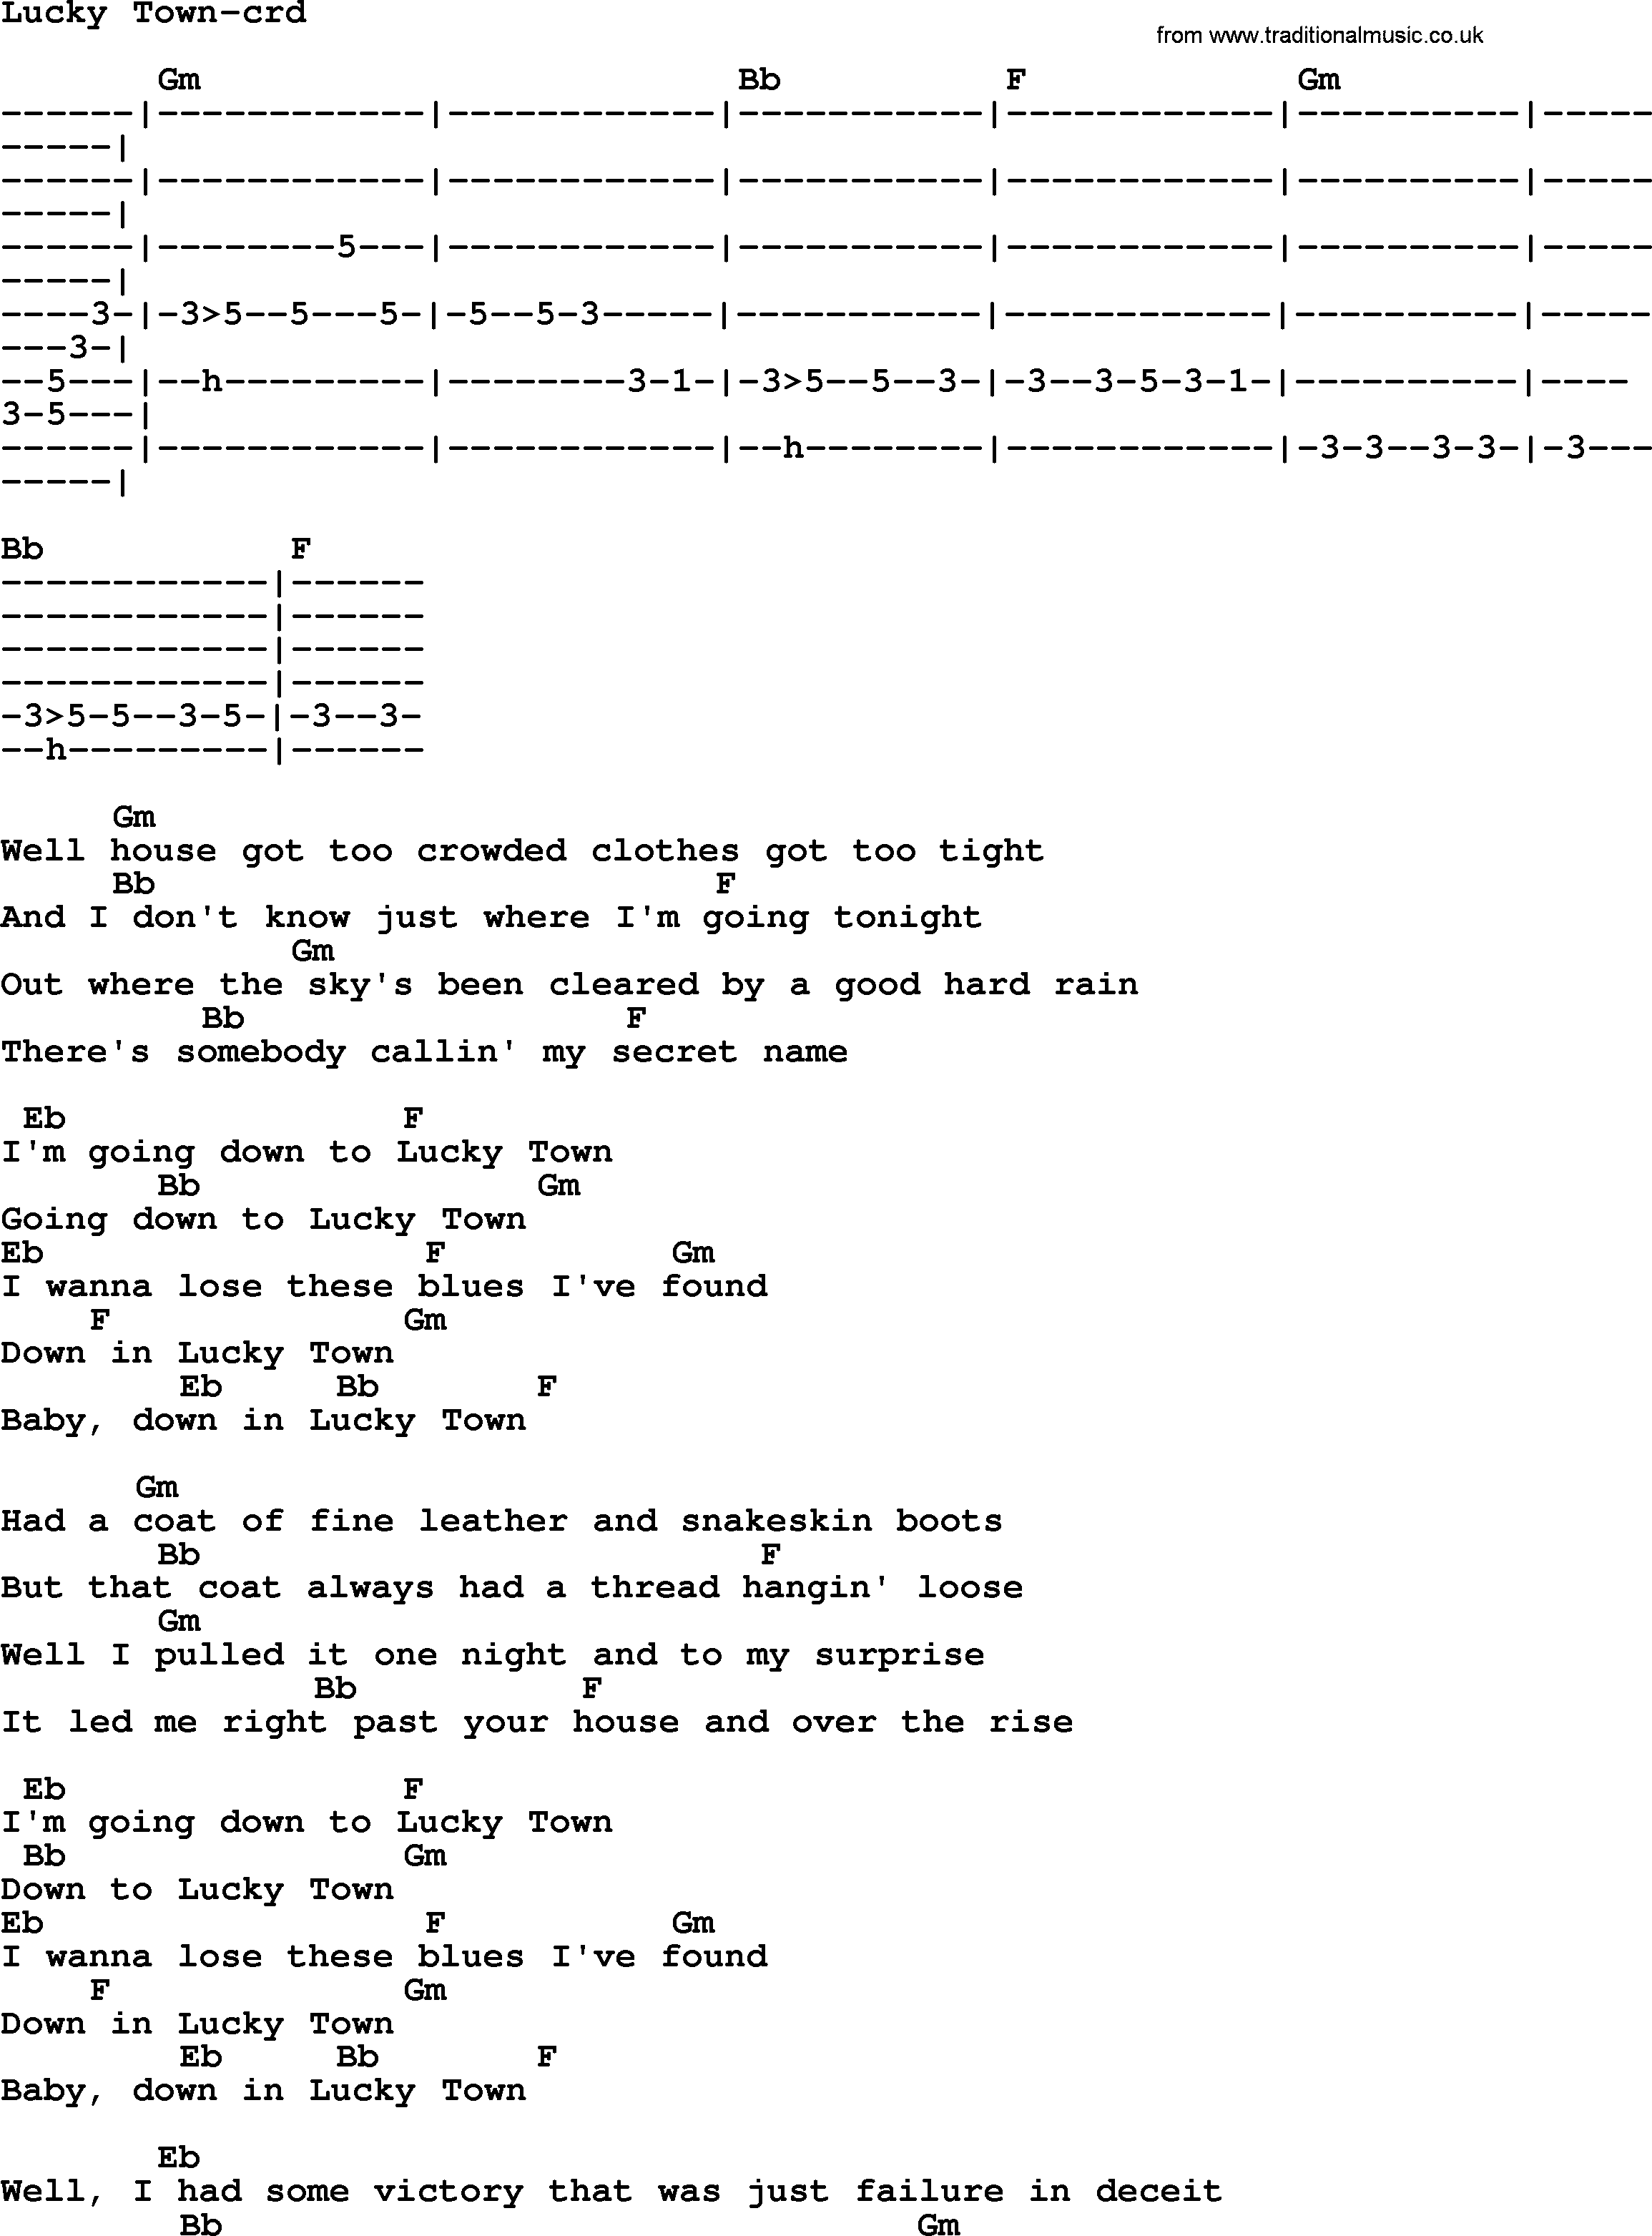 Bruce Springsteen song: Lucky Town, lyrics and chords